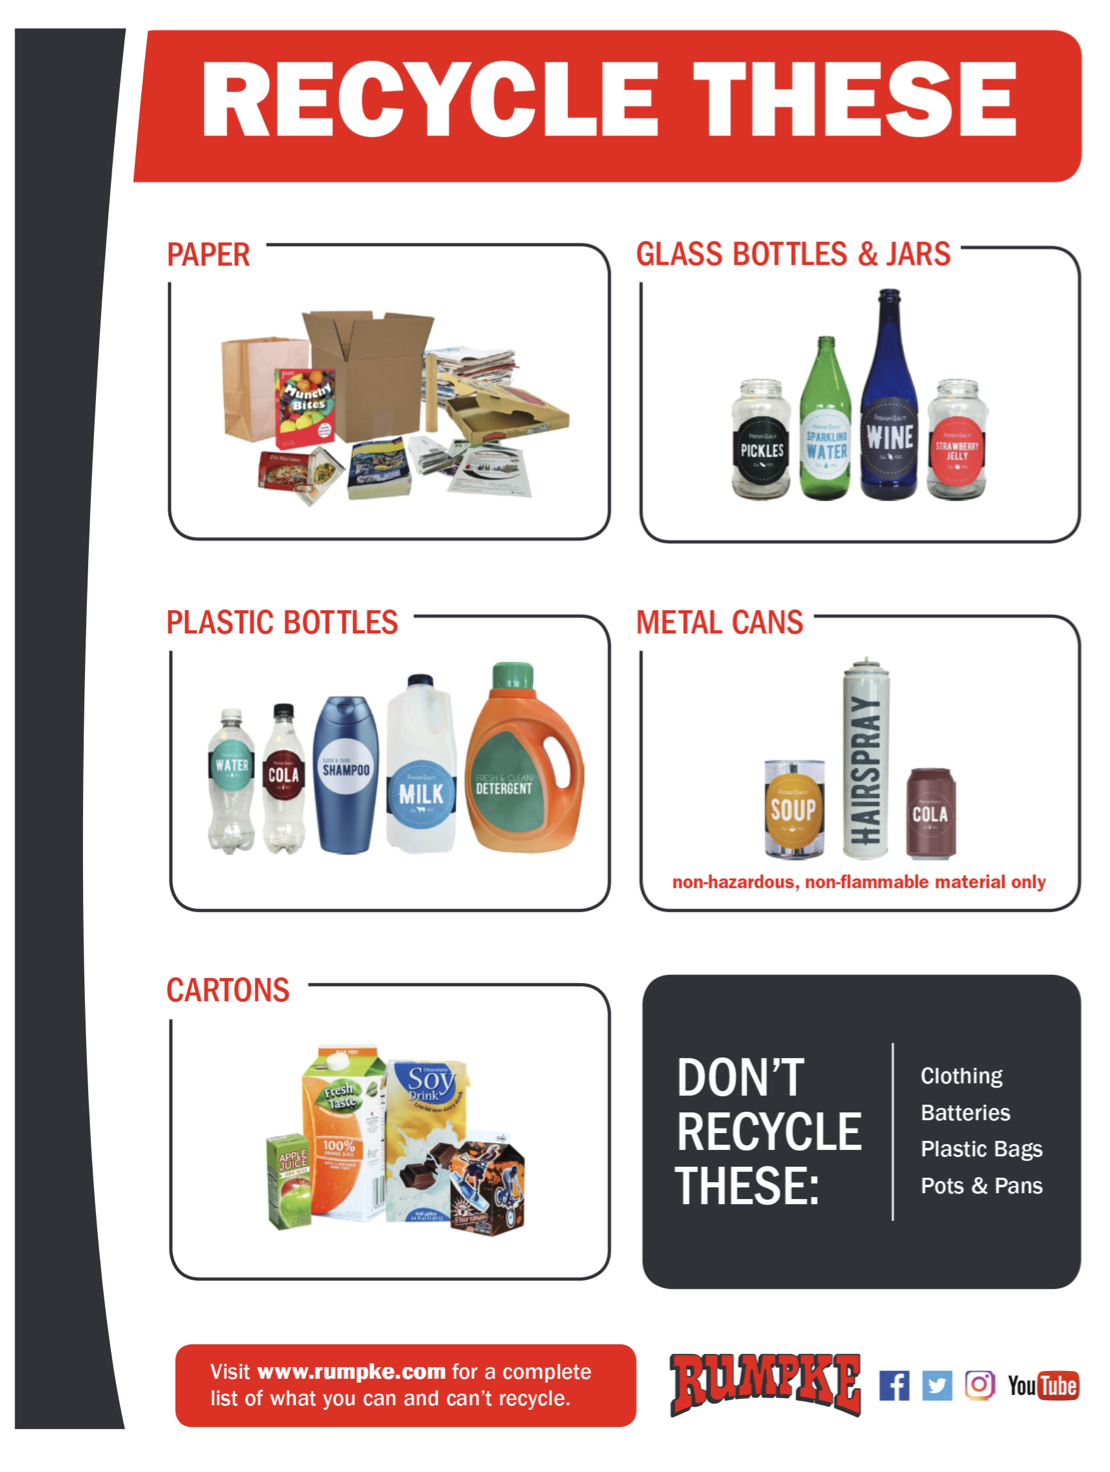 https://www.blufftonicon.com/sites/default/files/images/articles/2022/50105-curbside-recycling-refresher-village-bluffton-service.png